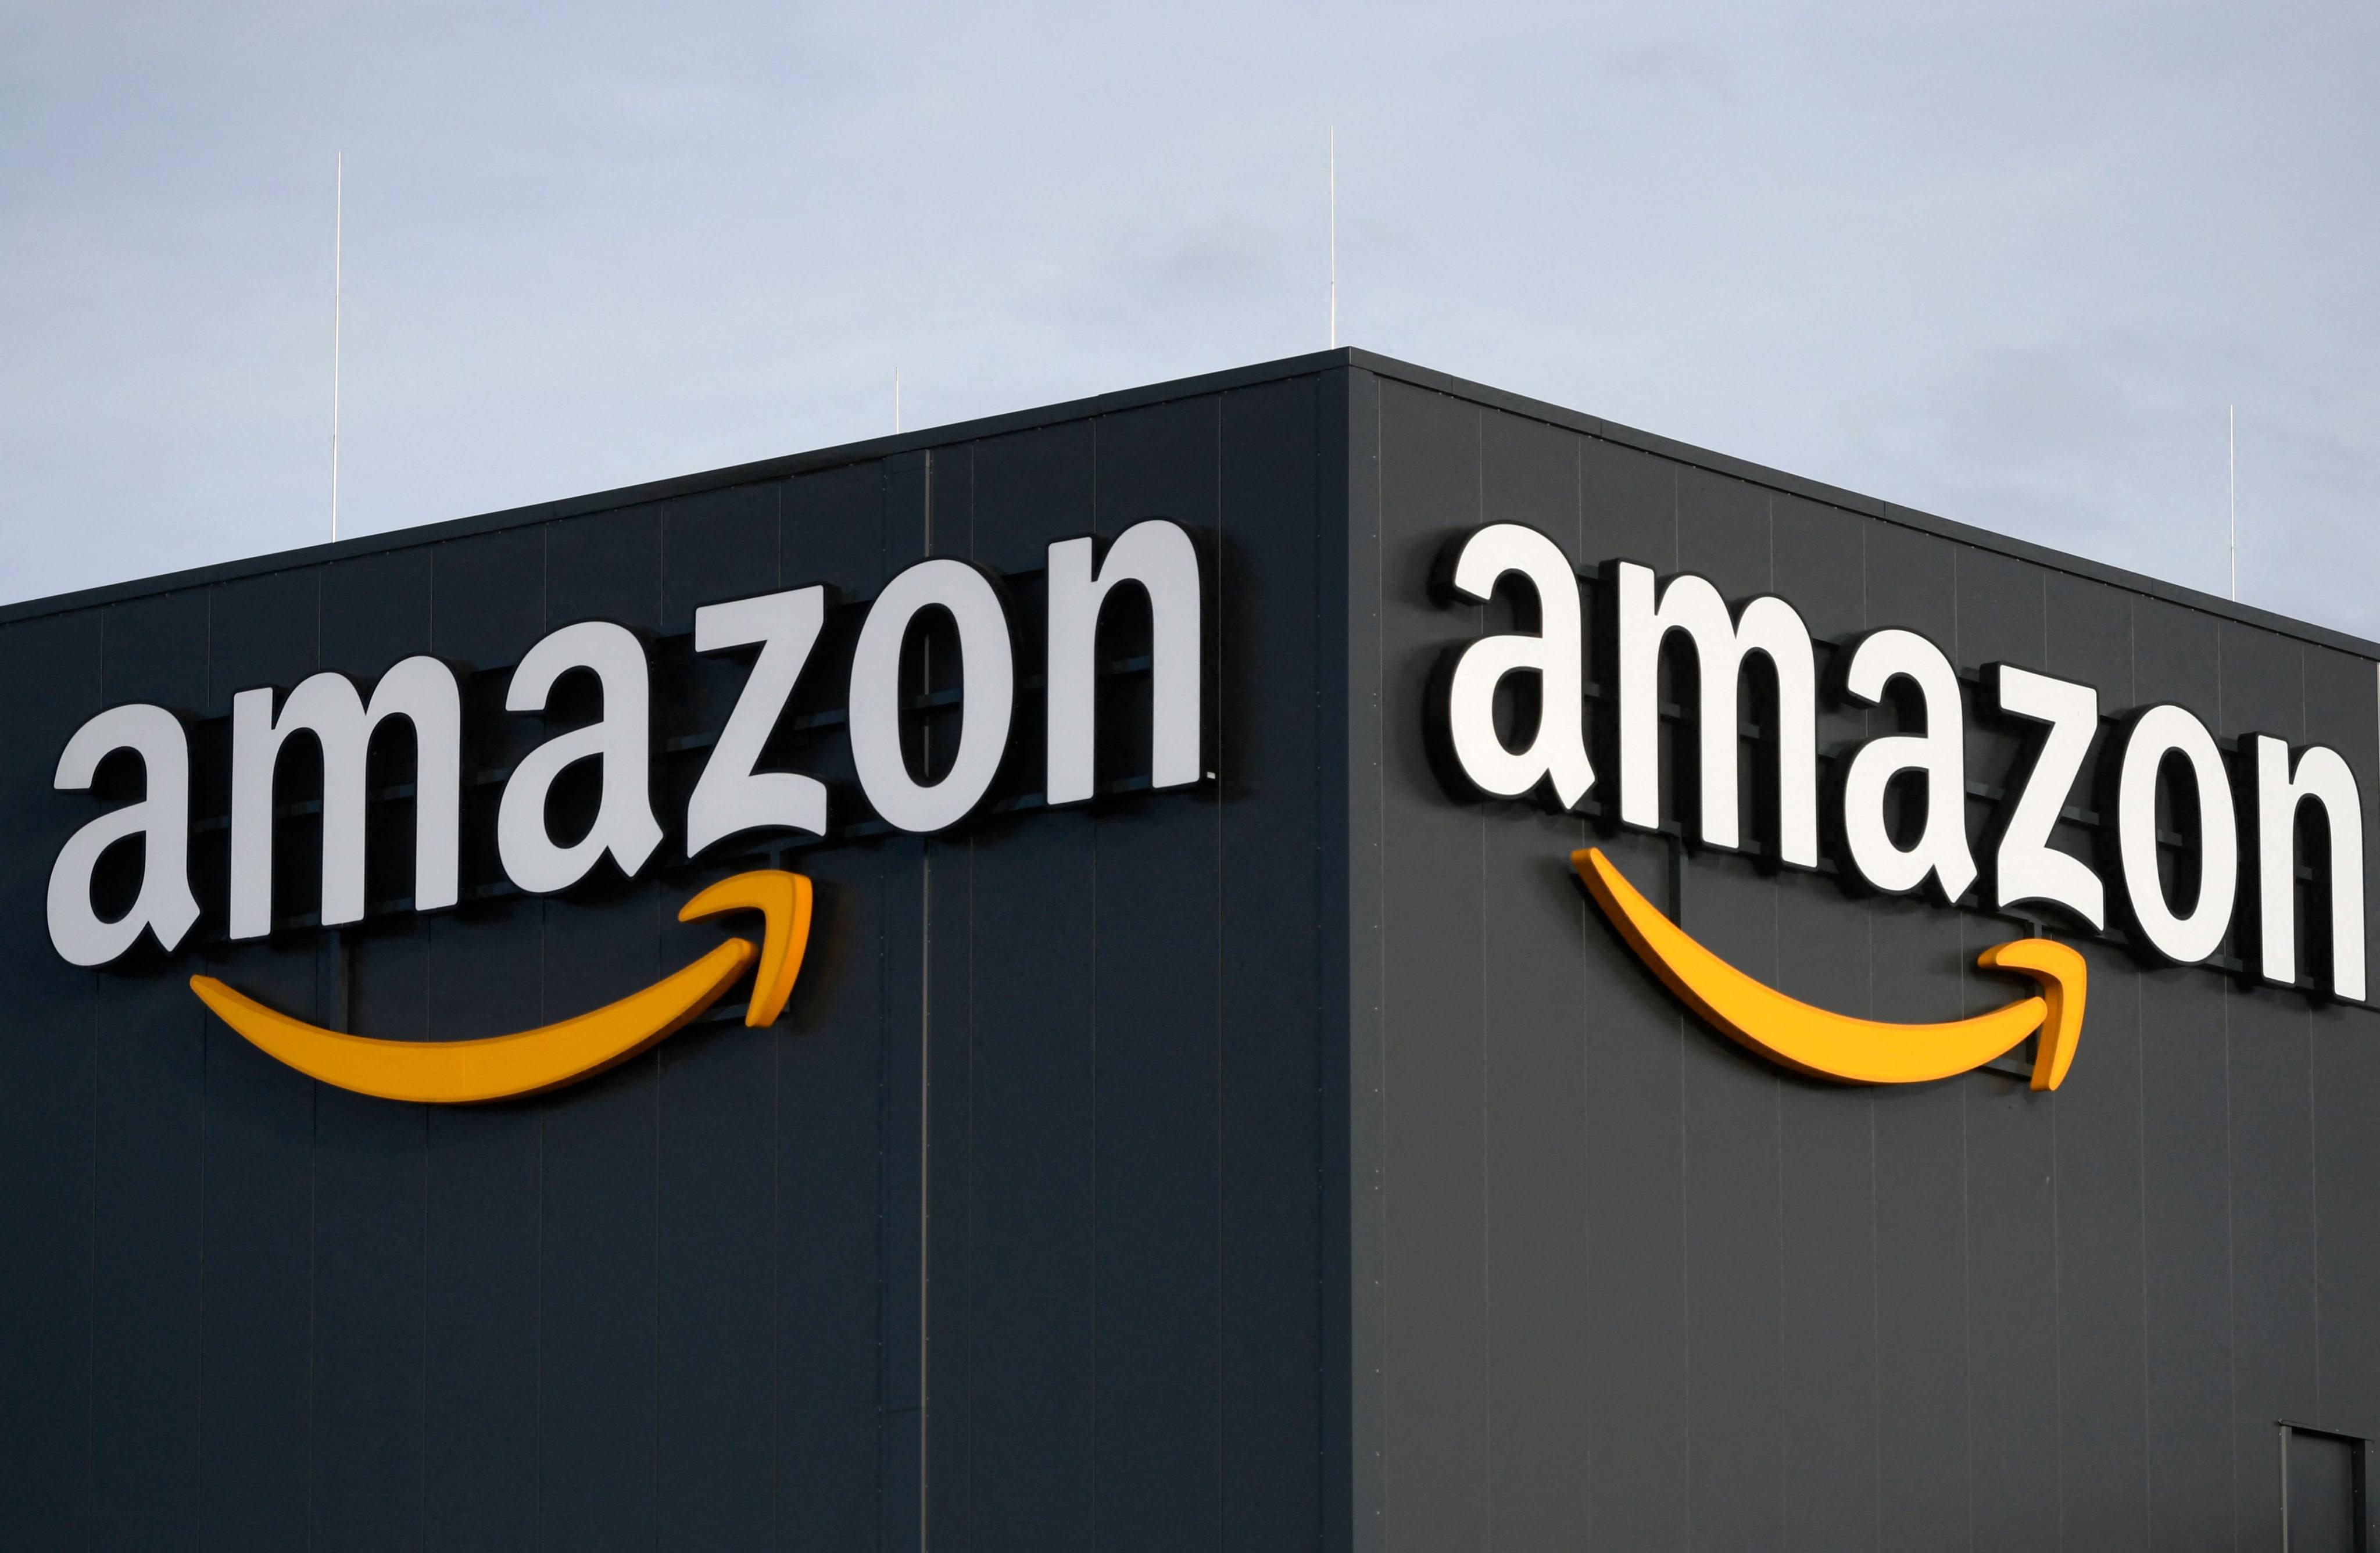 Amazon workers are demanding better wages and working conditions. Photo: AFP